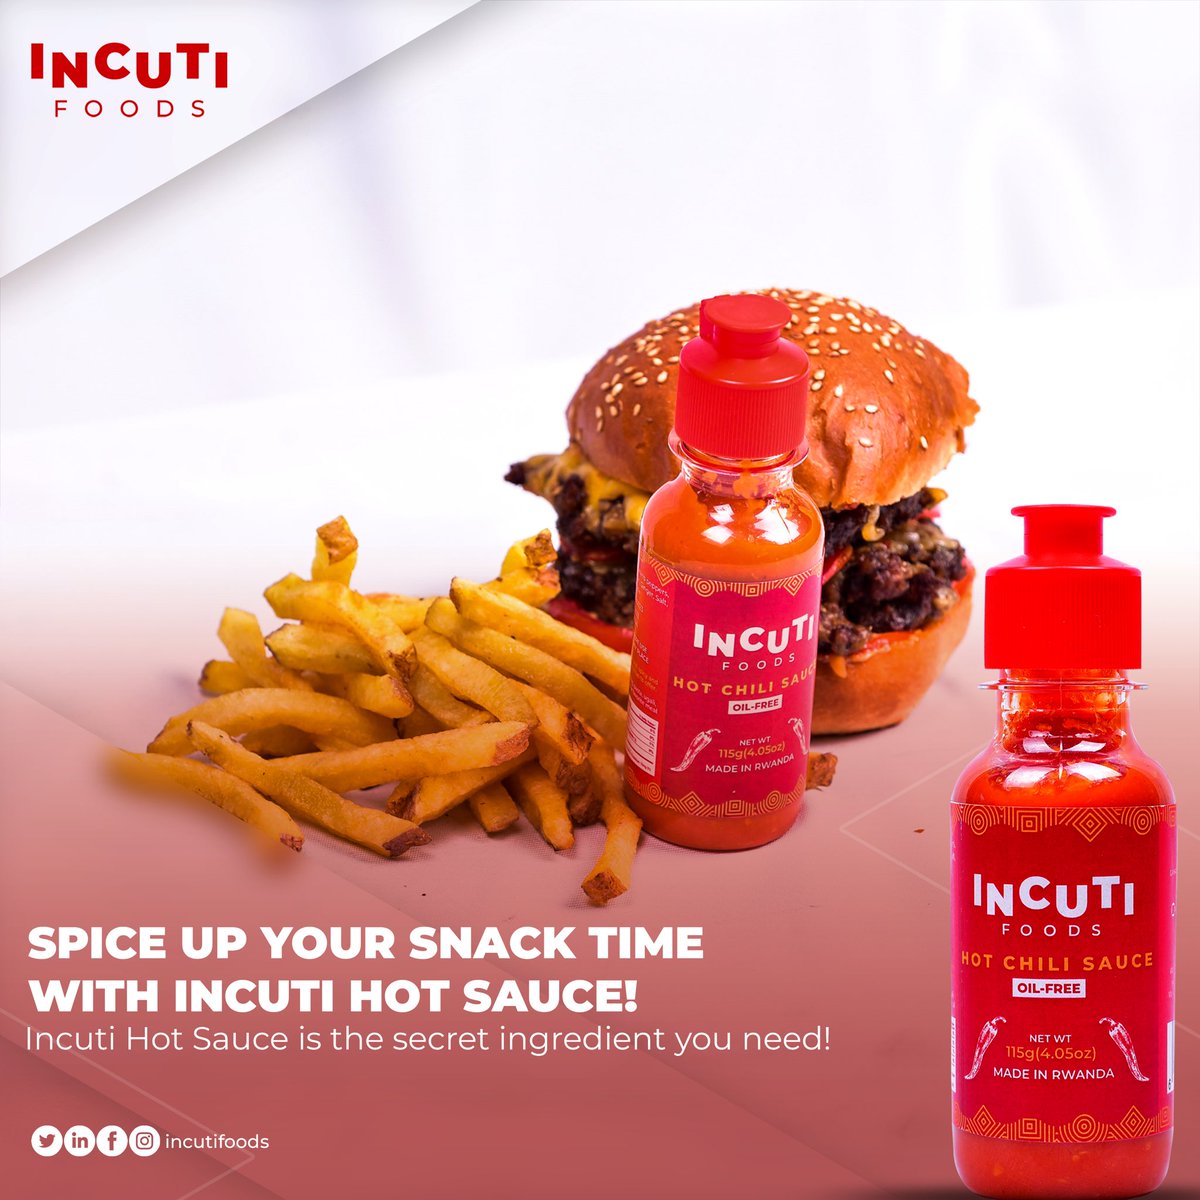 Craving a spicy snack?
Grab some fries & Burger and drizzle on our Hot Sauce for a flavor-packed experience that will leave you wanting more! 🌶️x🍟x🍔=😋

#incutifoods #madeinrwanda #chilisauce